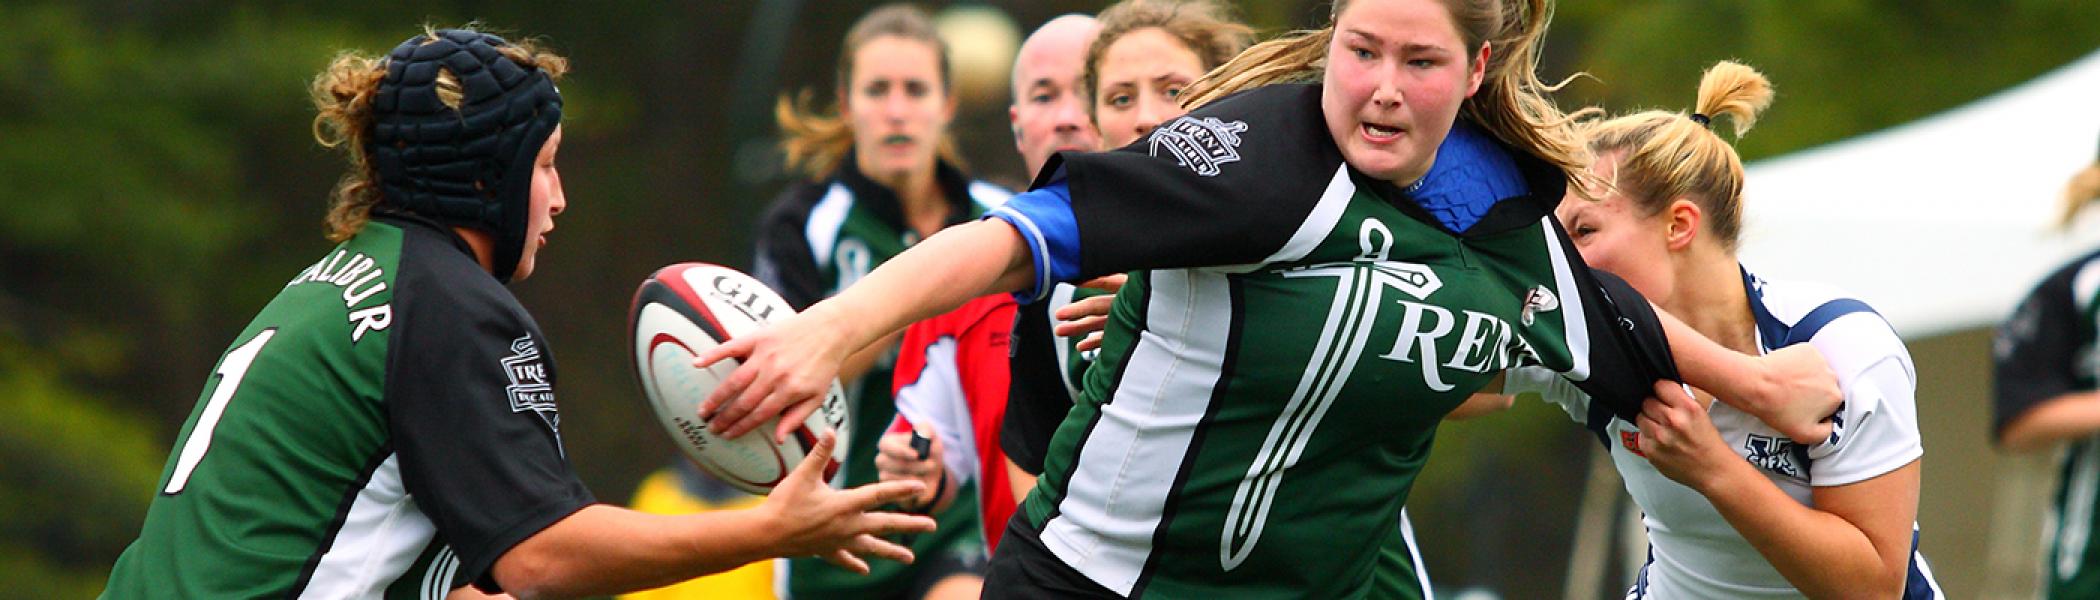 Women's outdoor rugby game in the fall at the Justin Chiu stadium